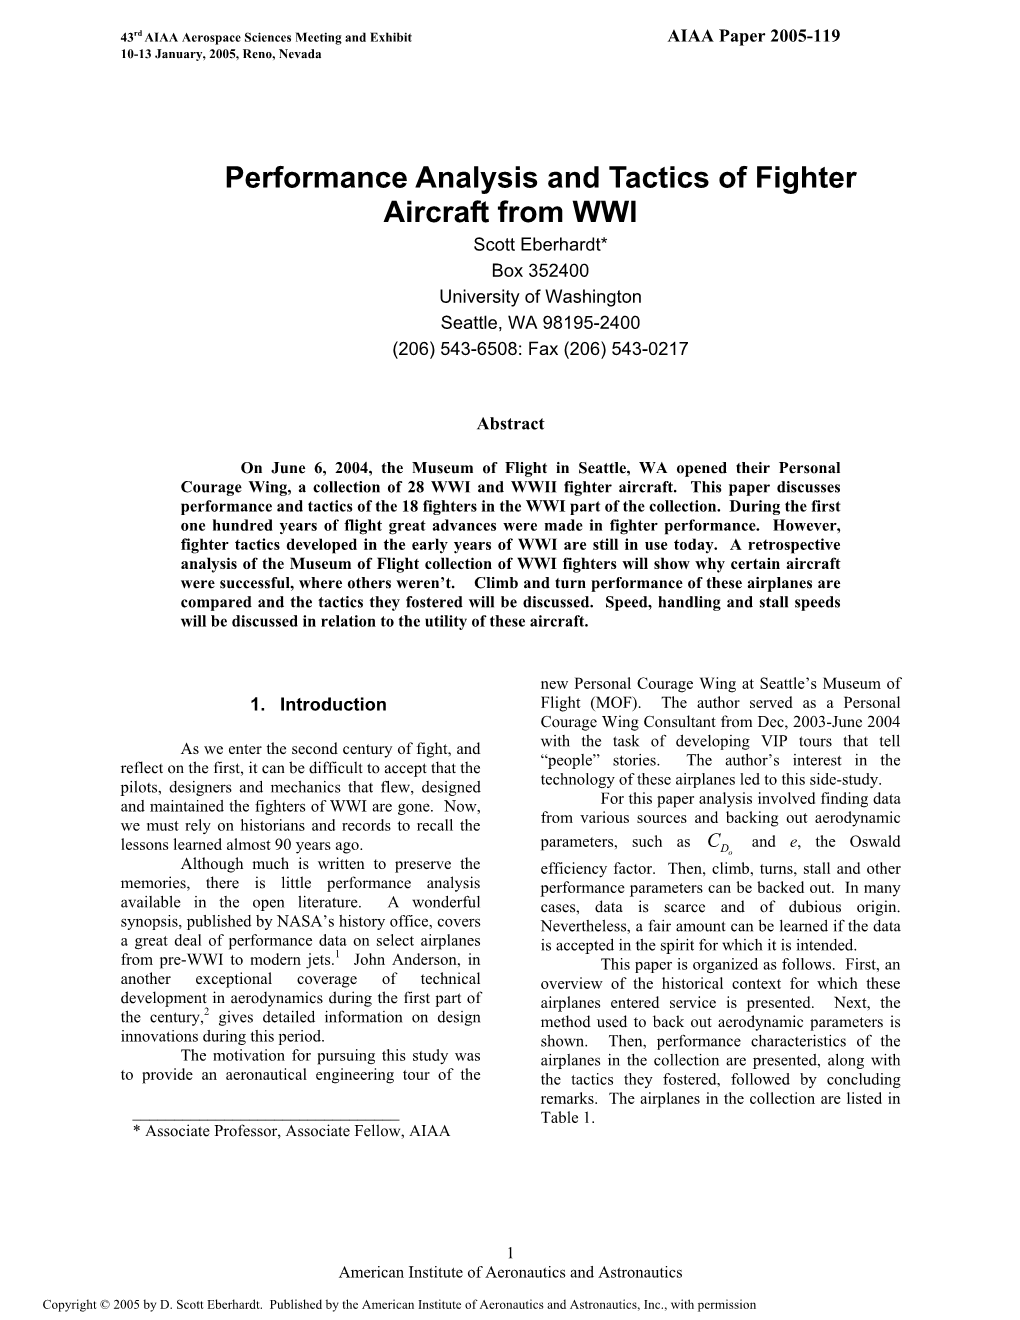 Performance Analysis and Tactics of Fighter Aircraft From